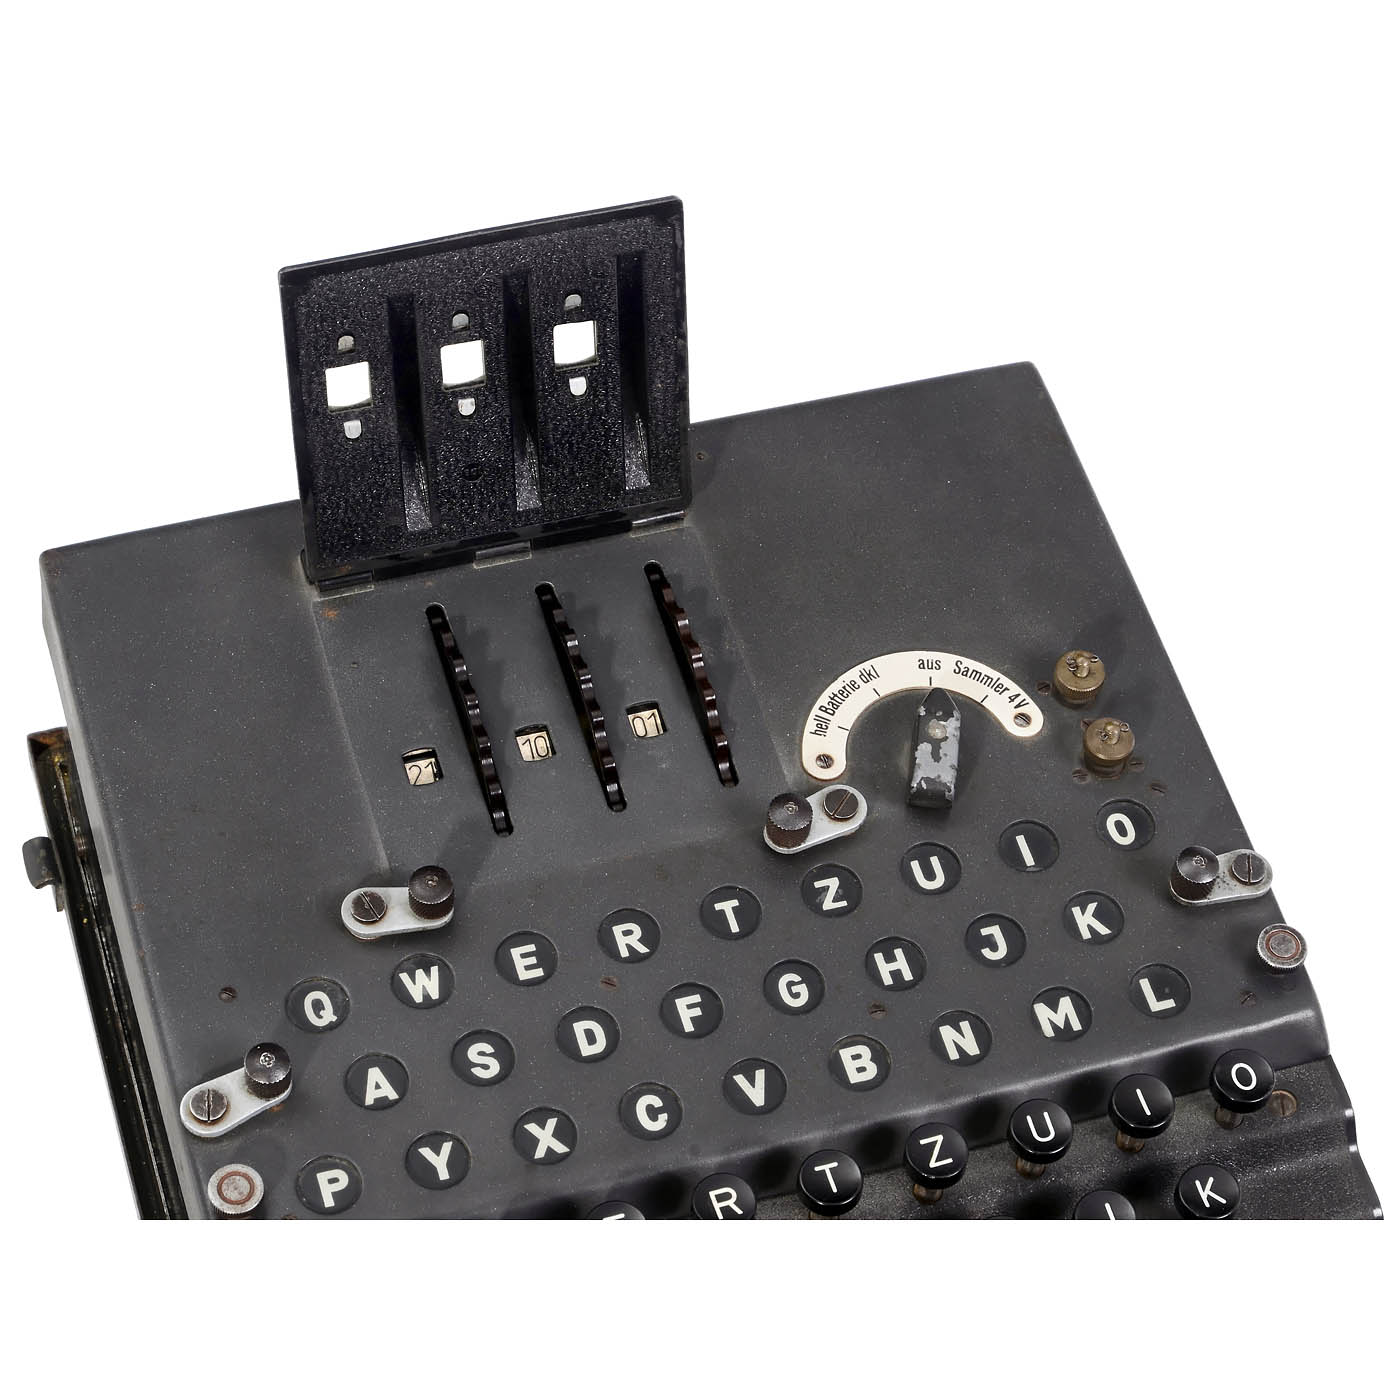 Legendary German "Enigma 1" Cyphering Machine with Special Switching, 1944 - Image 5 of 10